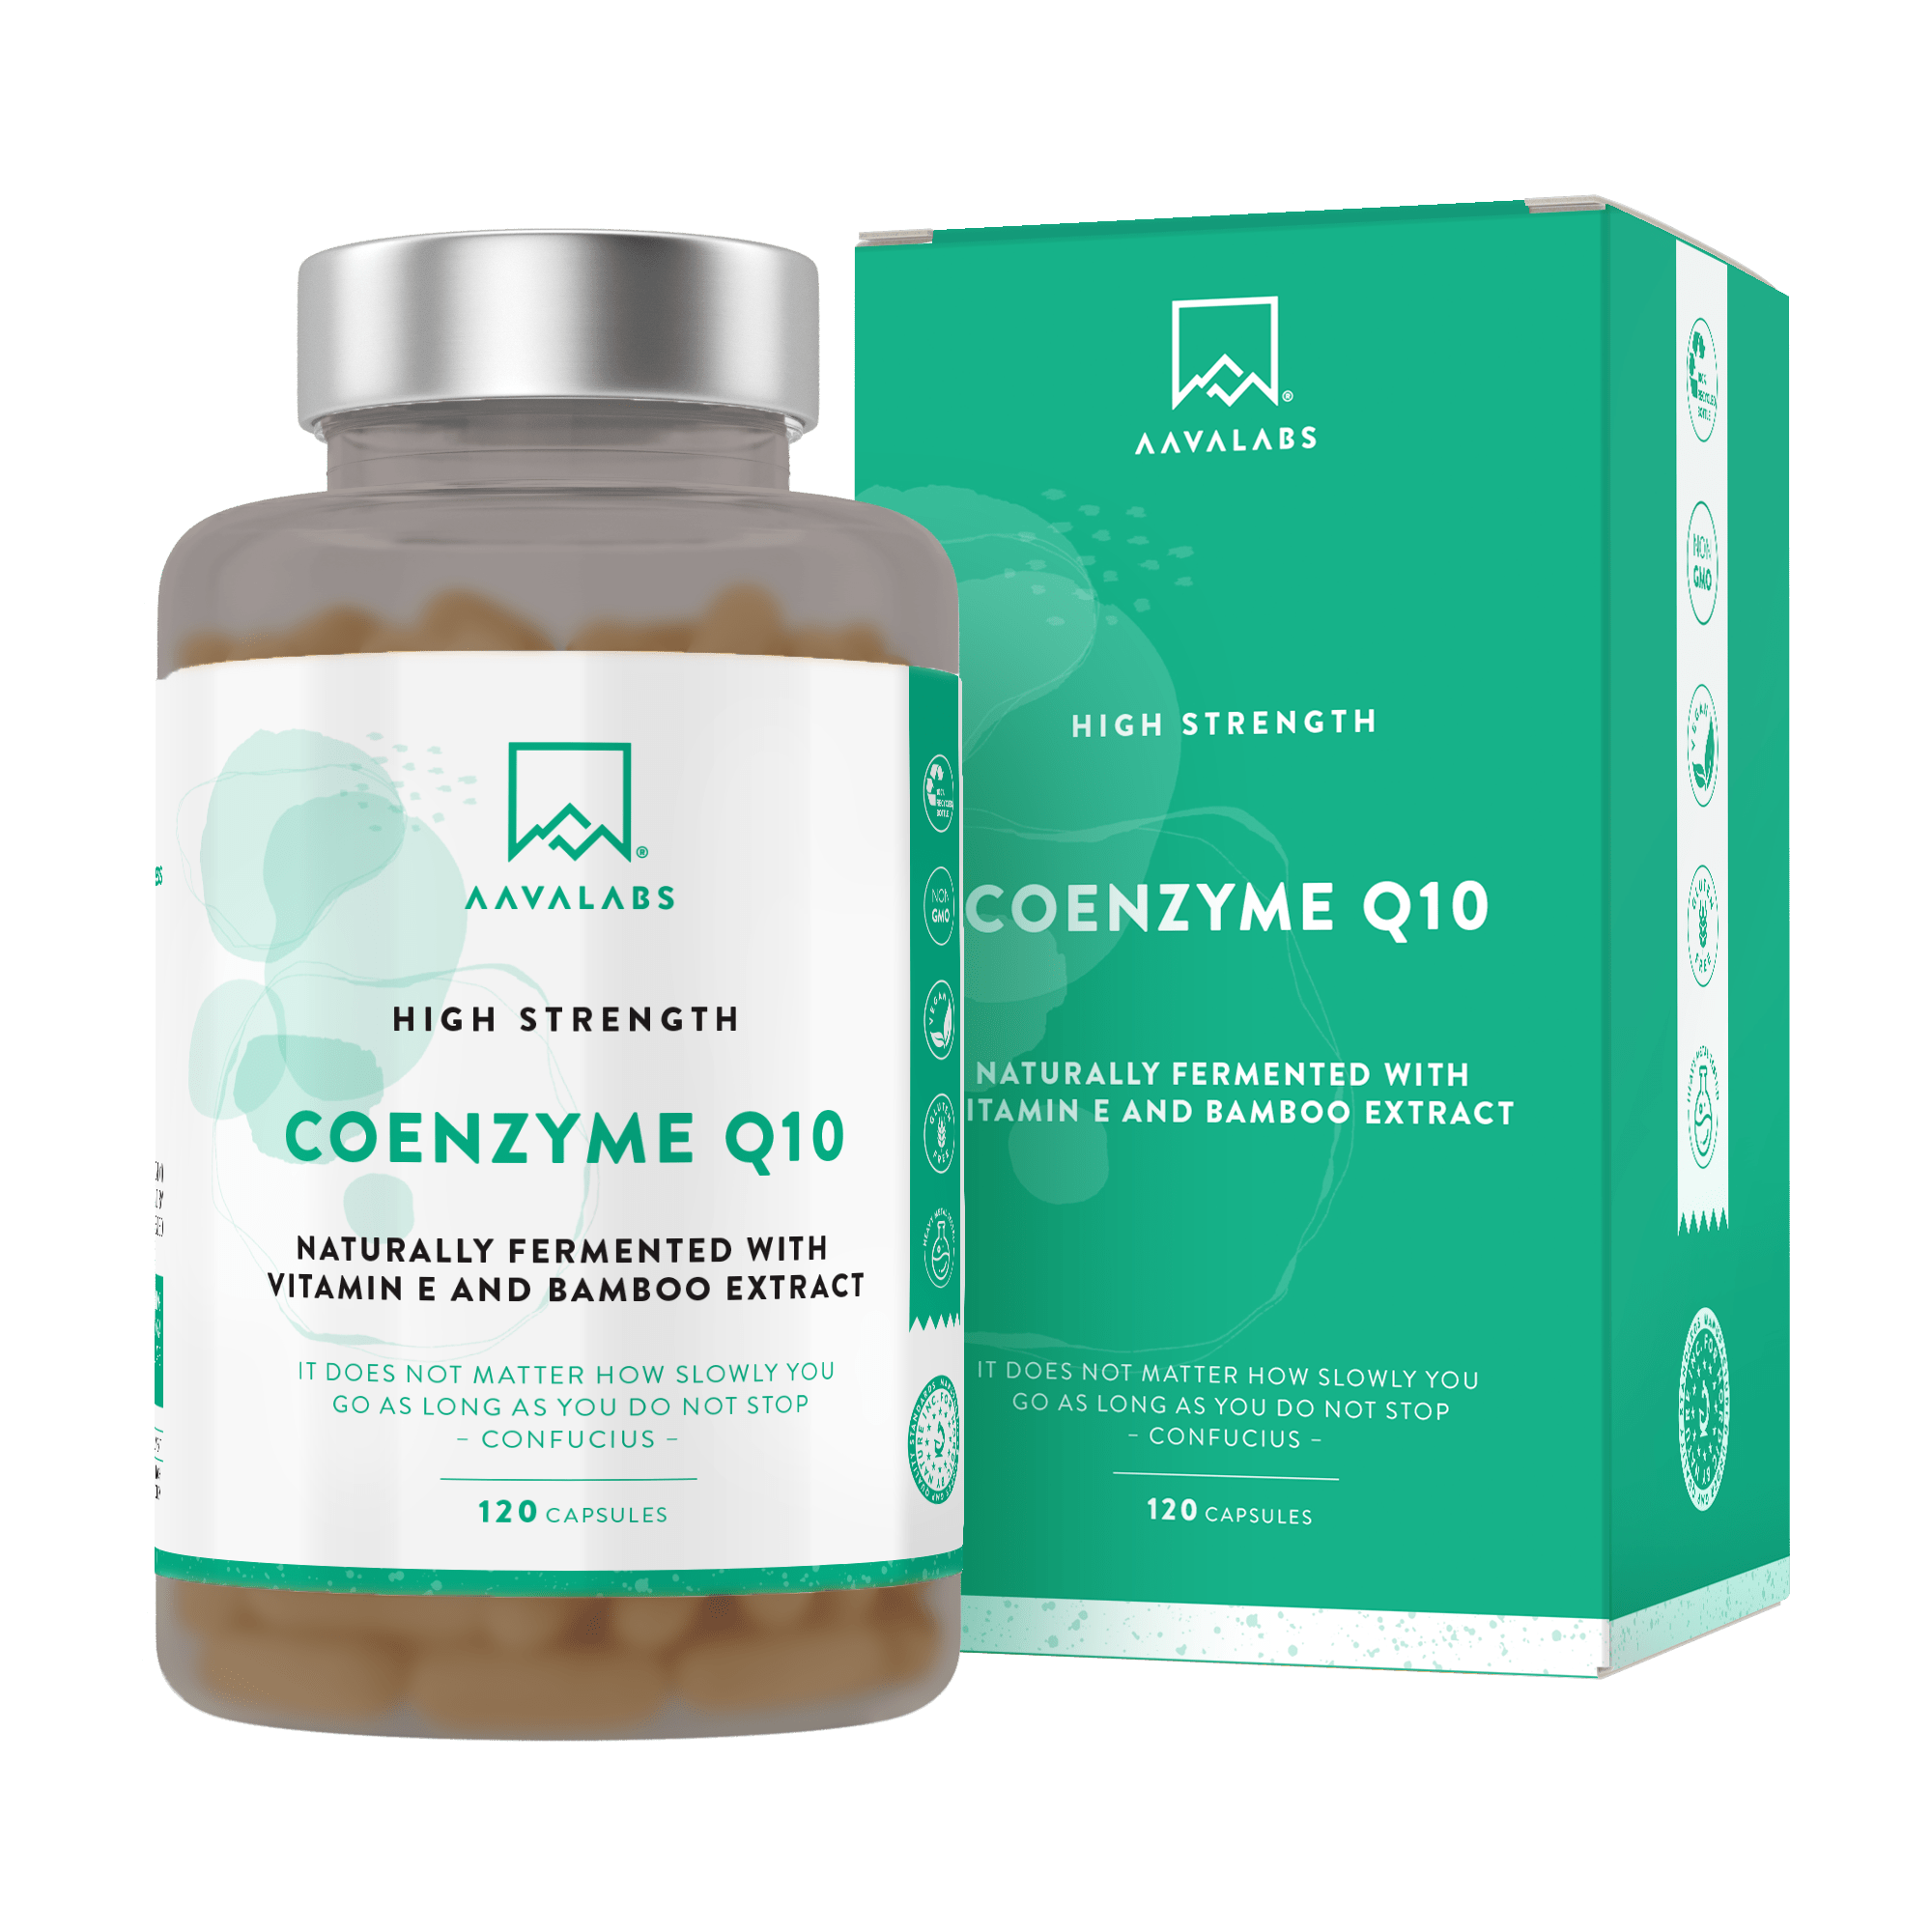 Coenzyme Q10 supplement bottle and box - AAVALABS